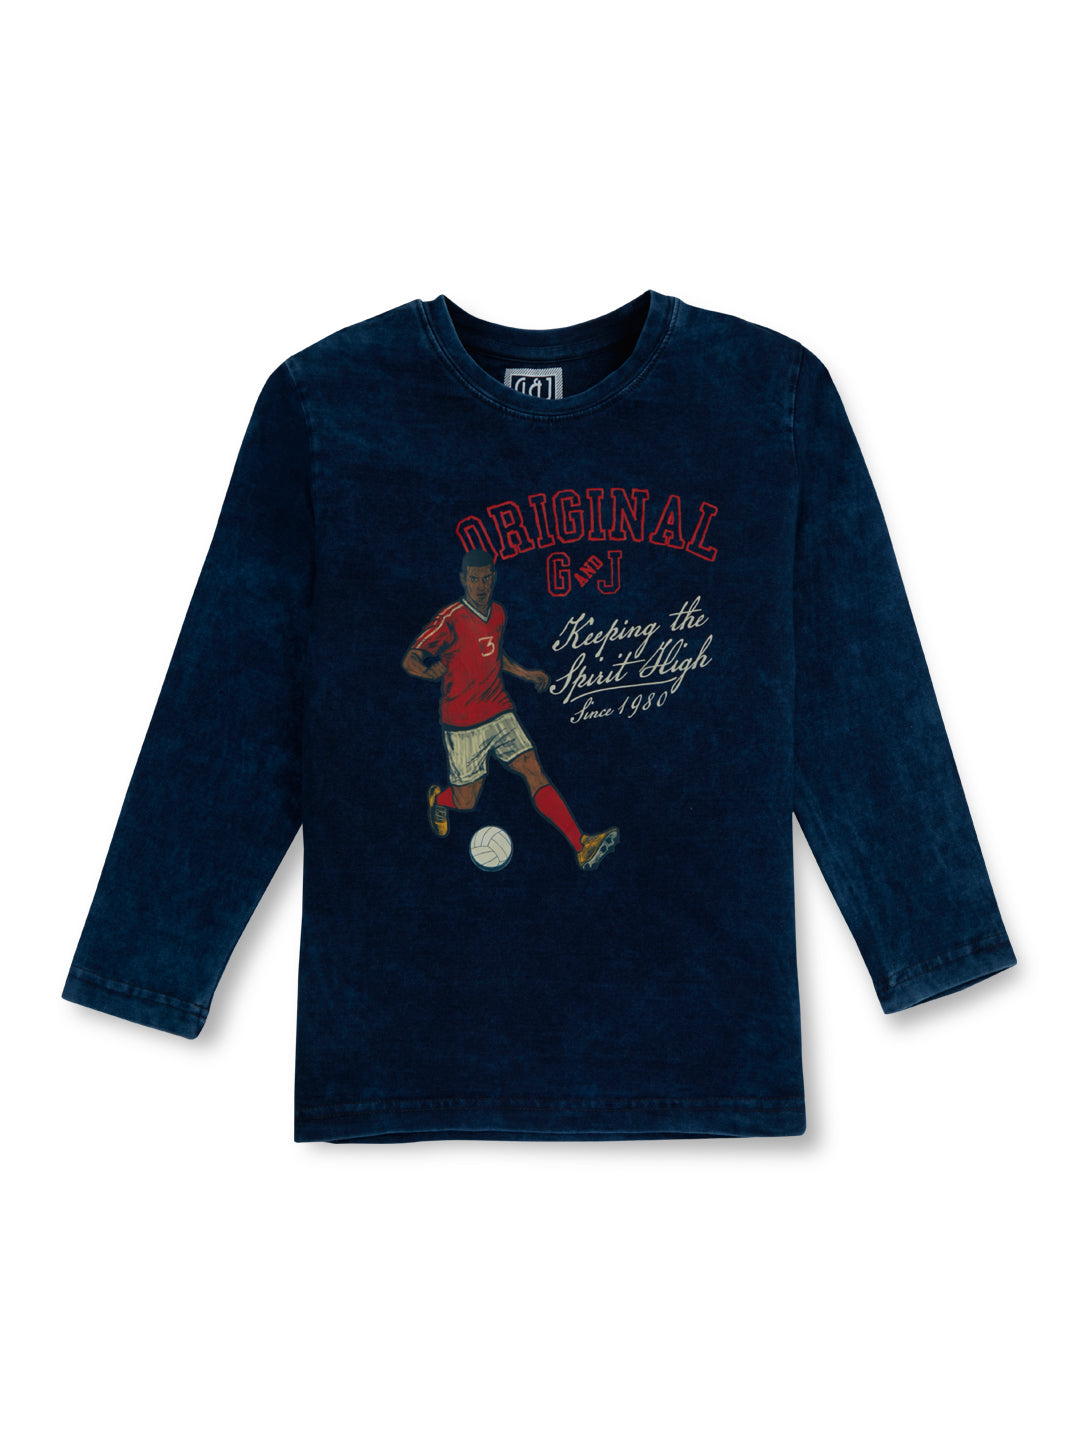 Boys Blue Solid Cotton Full Sleeves T-Shirt